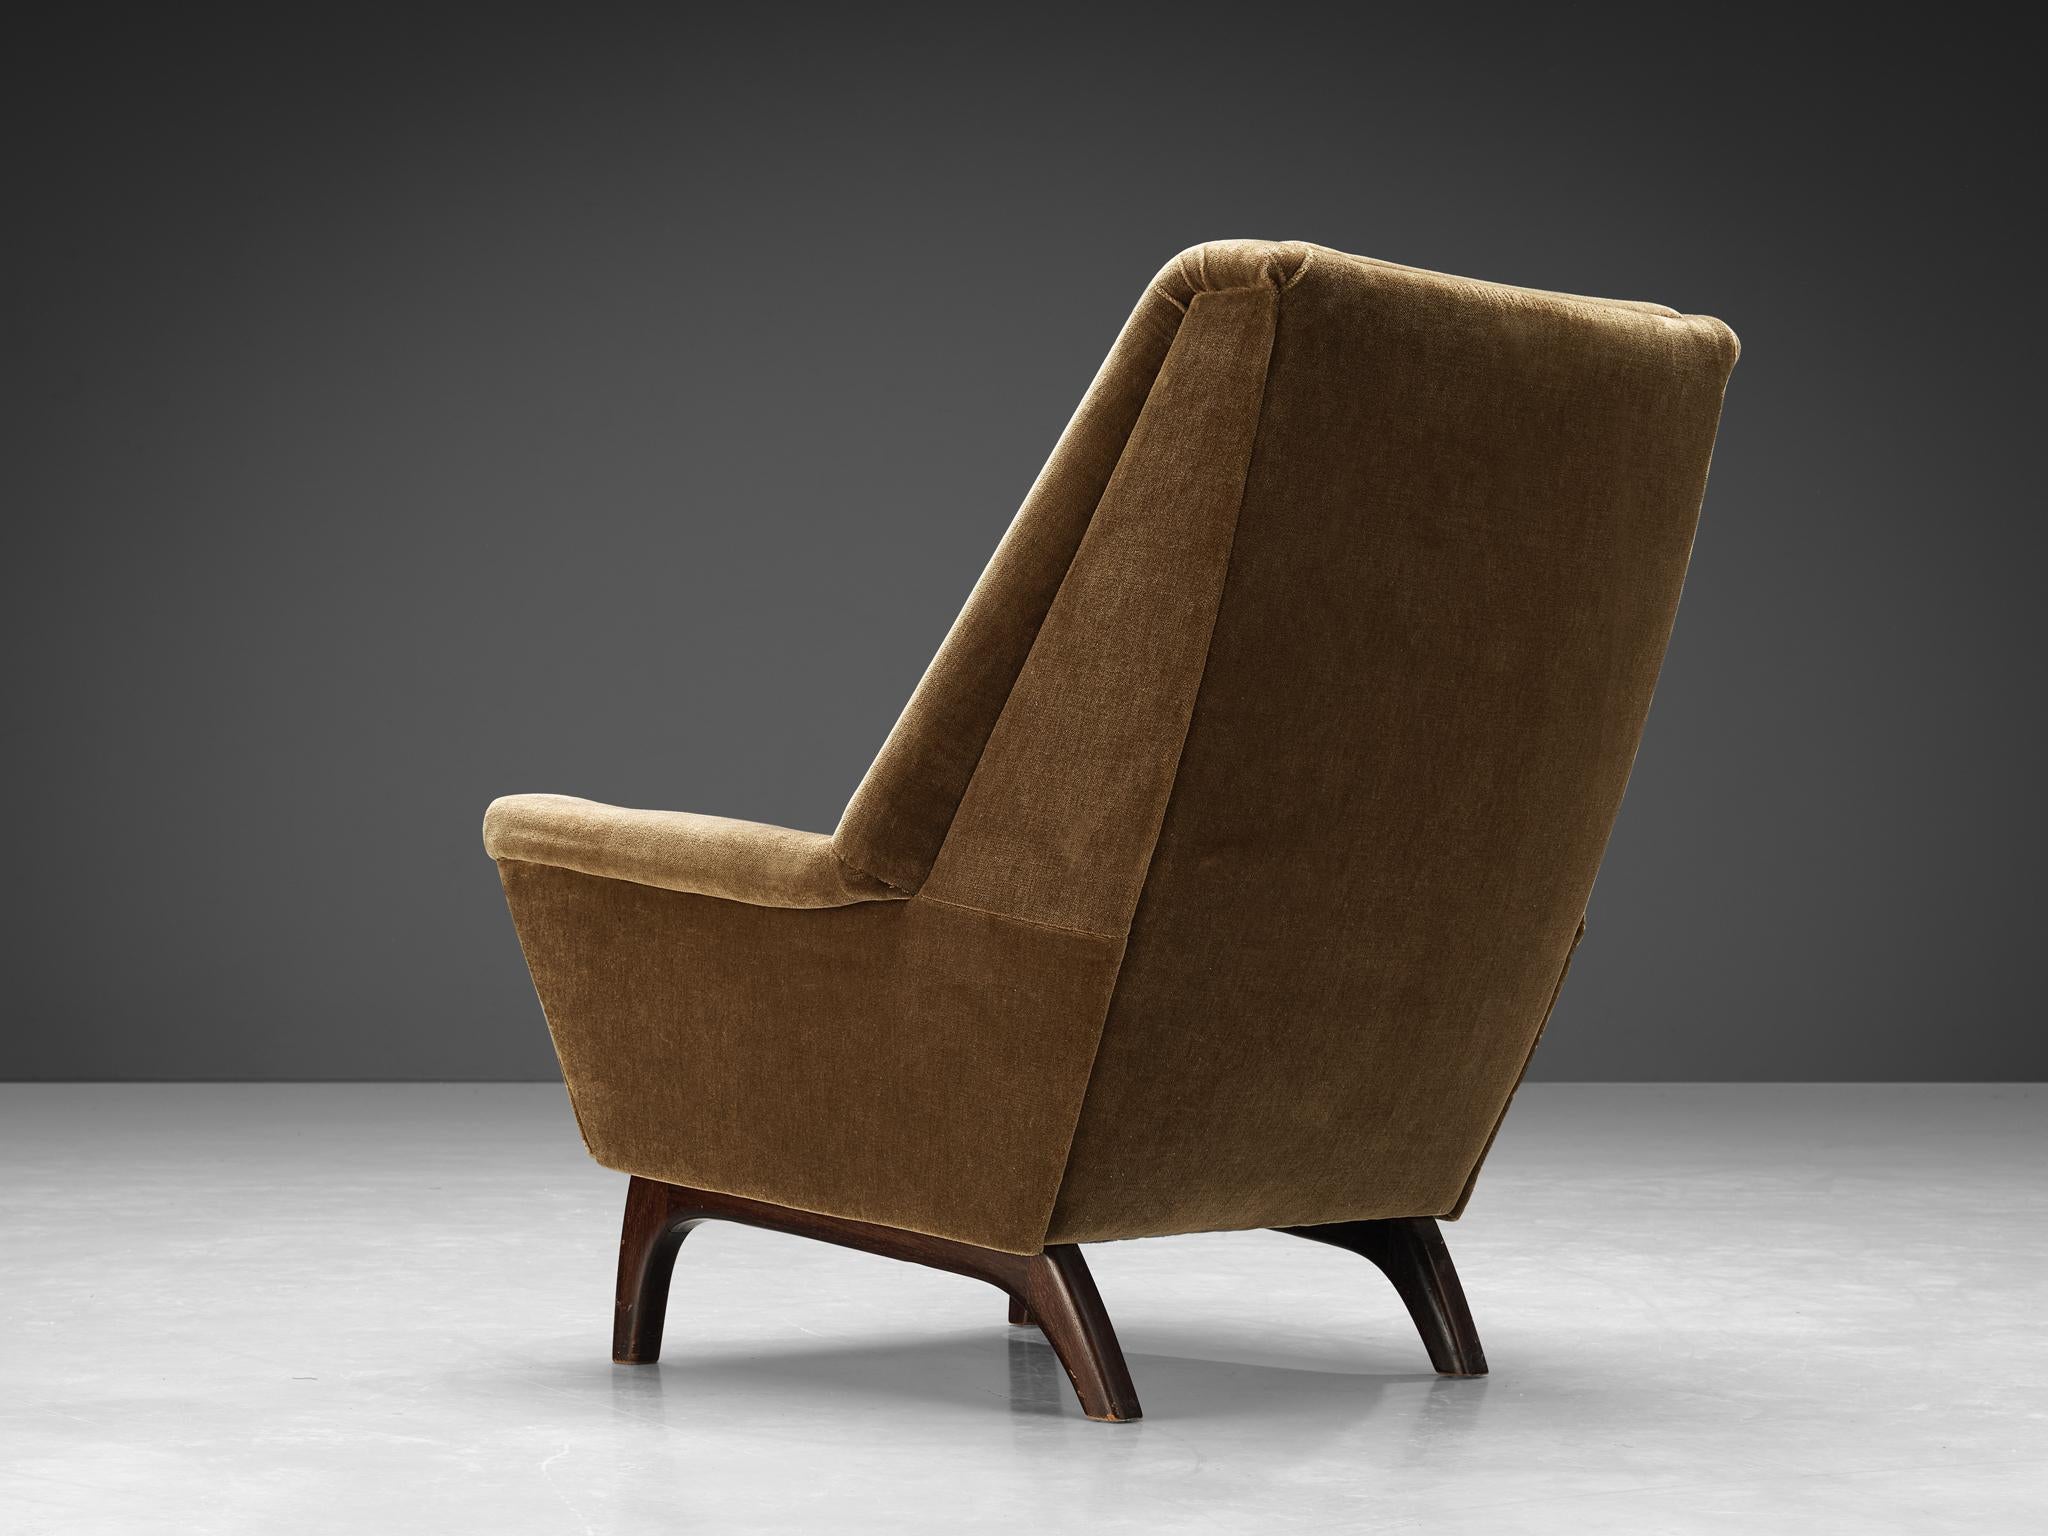 Lounge chair, dark stained teak, velvet fabric, Denmark, 1960s

This classic lounge chair of Danish origin features modest and subtle lines and shapes that emphasize the clear construction of the design. A nice detail is how the back elegantly runs